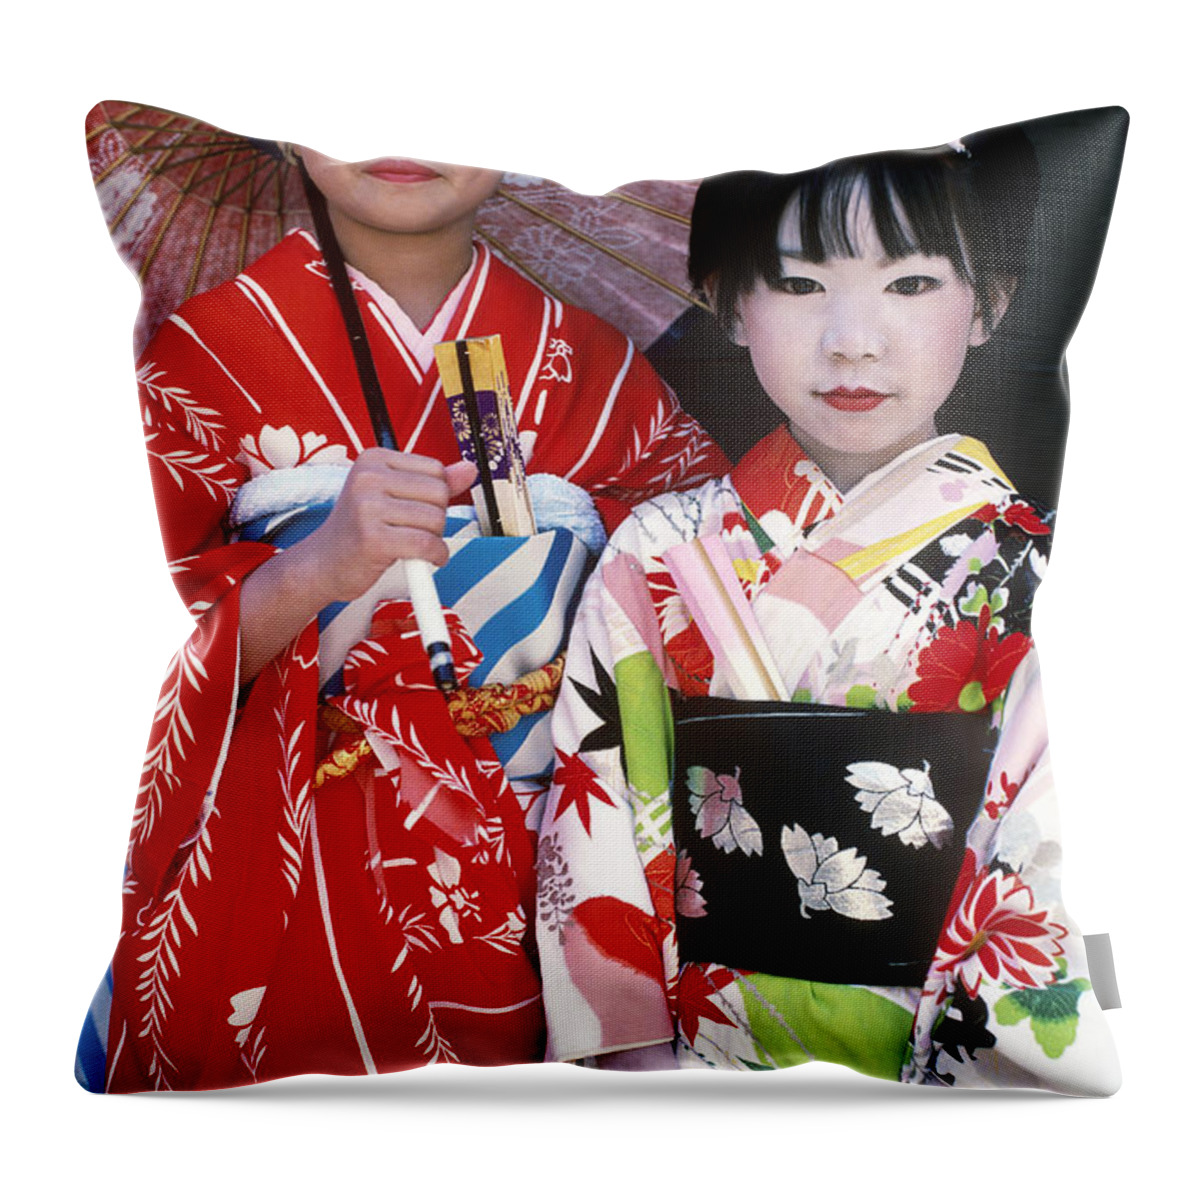 Japan Throw Pillow featuring the photograph Traditional Japanese Clothing by Susan McCartney